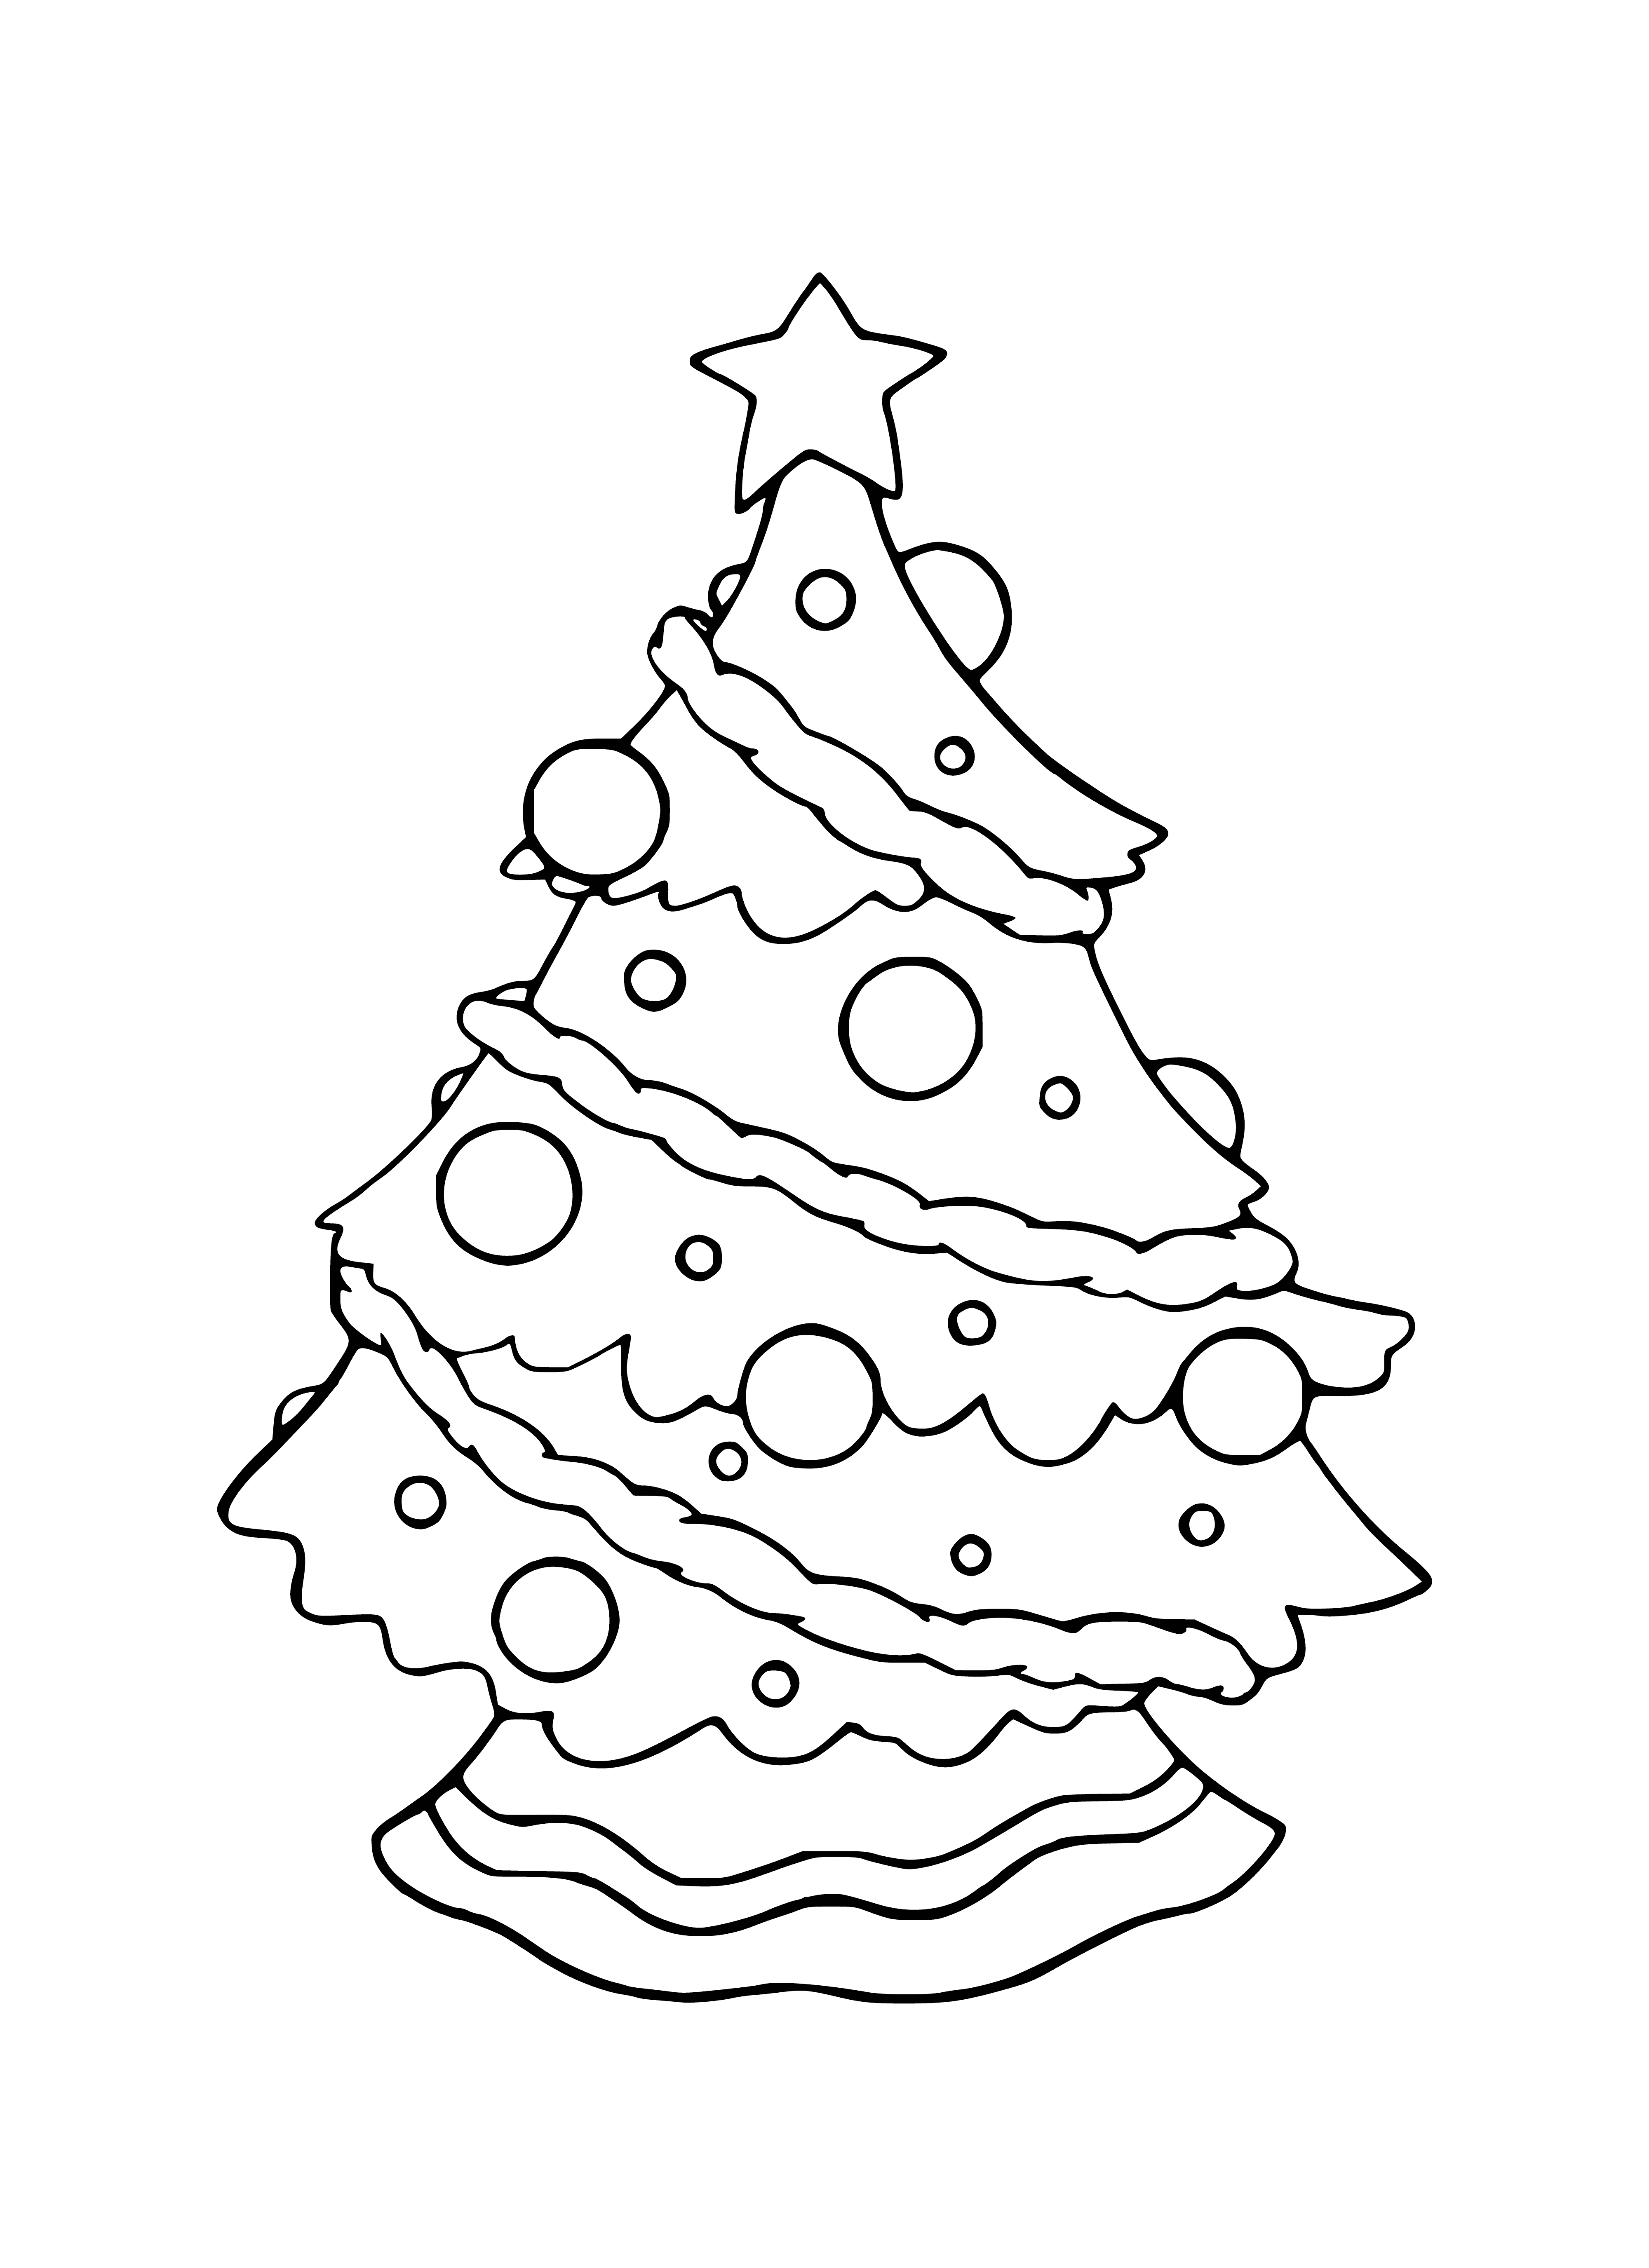 coloring page: Pretty Christmas tree is decorated with ornaments, garland & star. Presents are around it & cat peeking out from one!